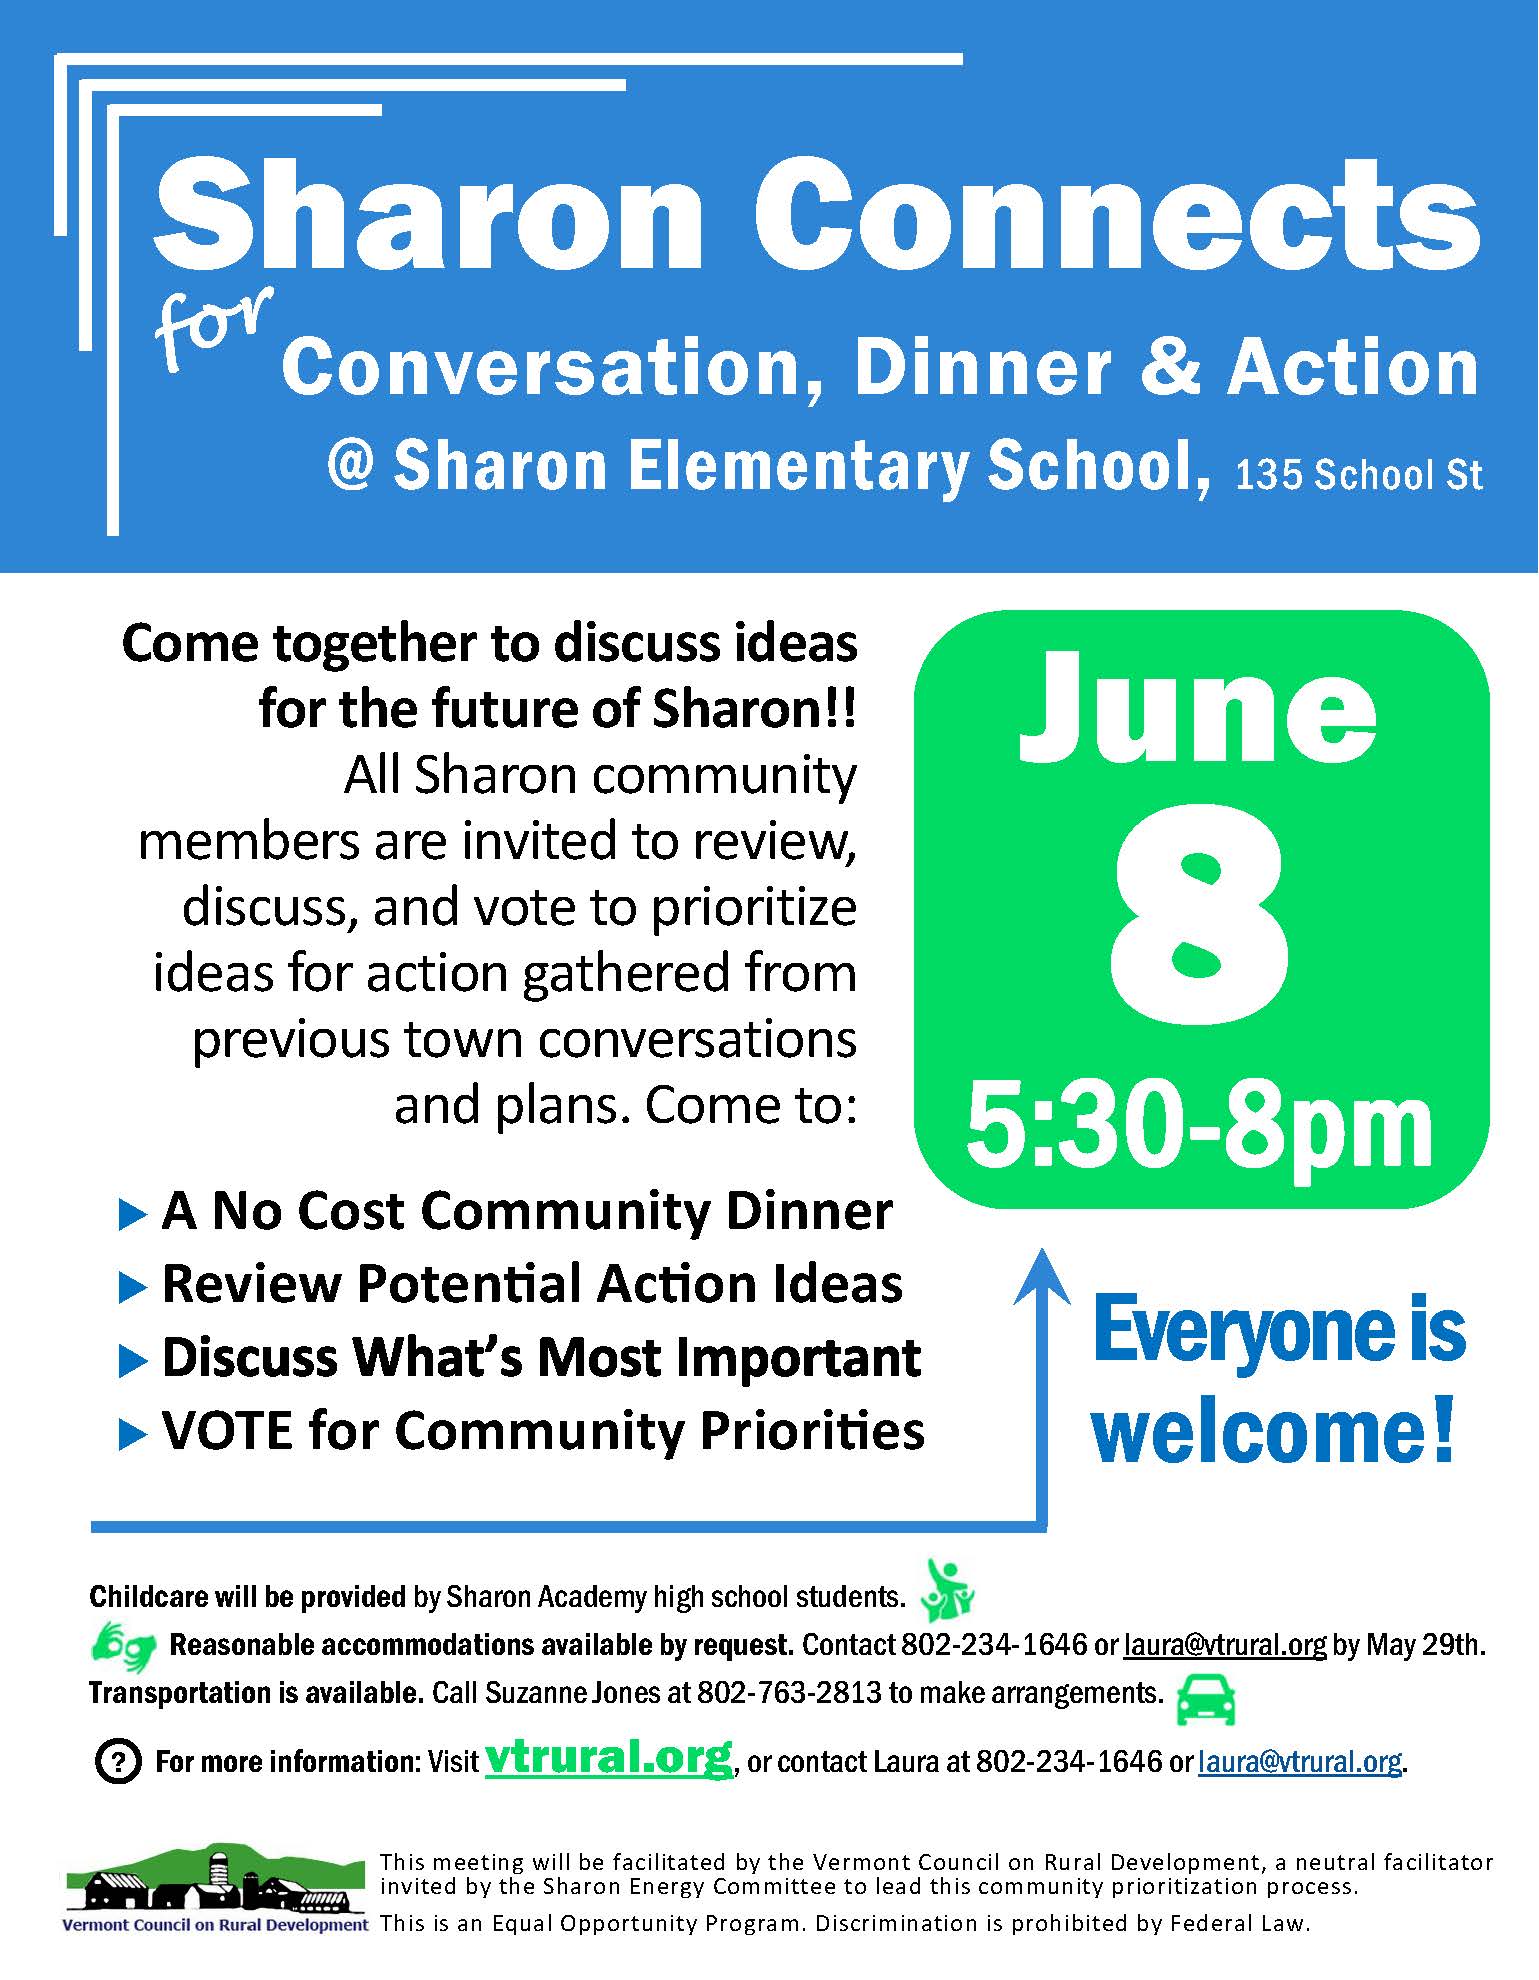 Sharon Connects for conversation, dinner, & action on June 8, 2023 from 5:30-8pm at the Sharon Elementary School